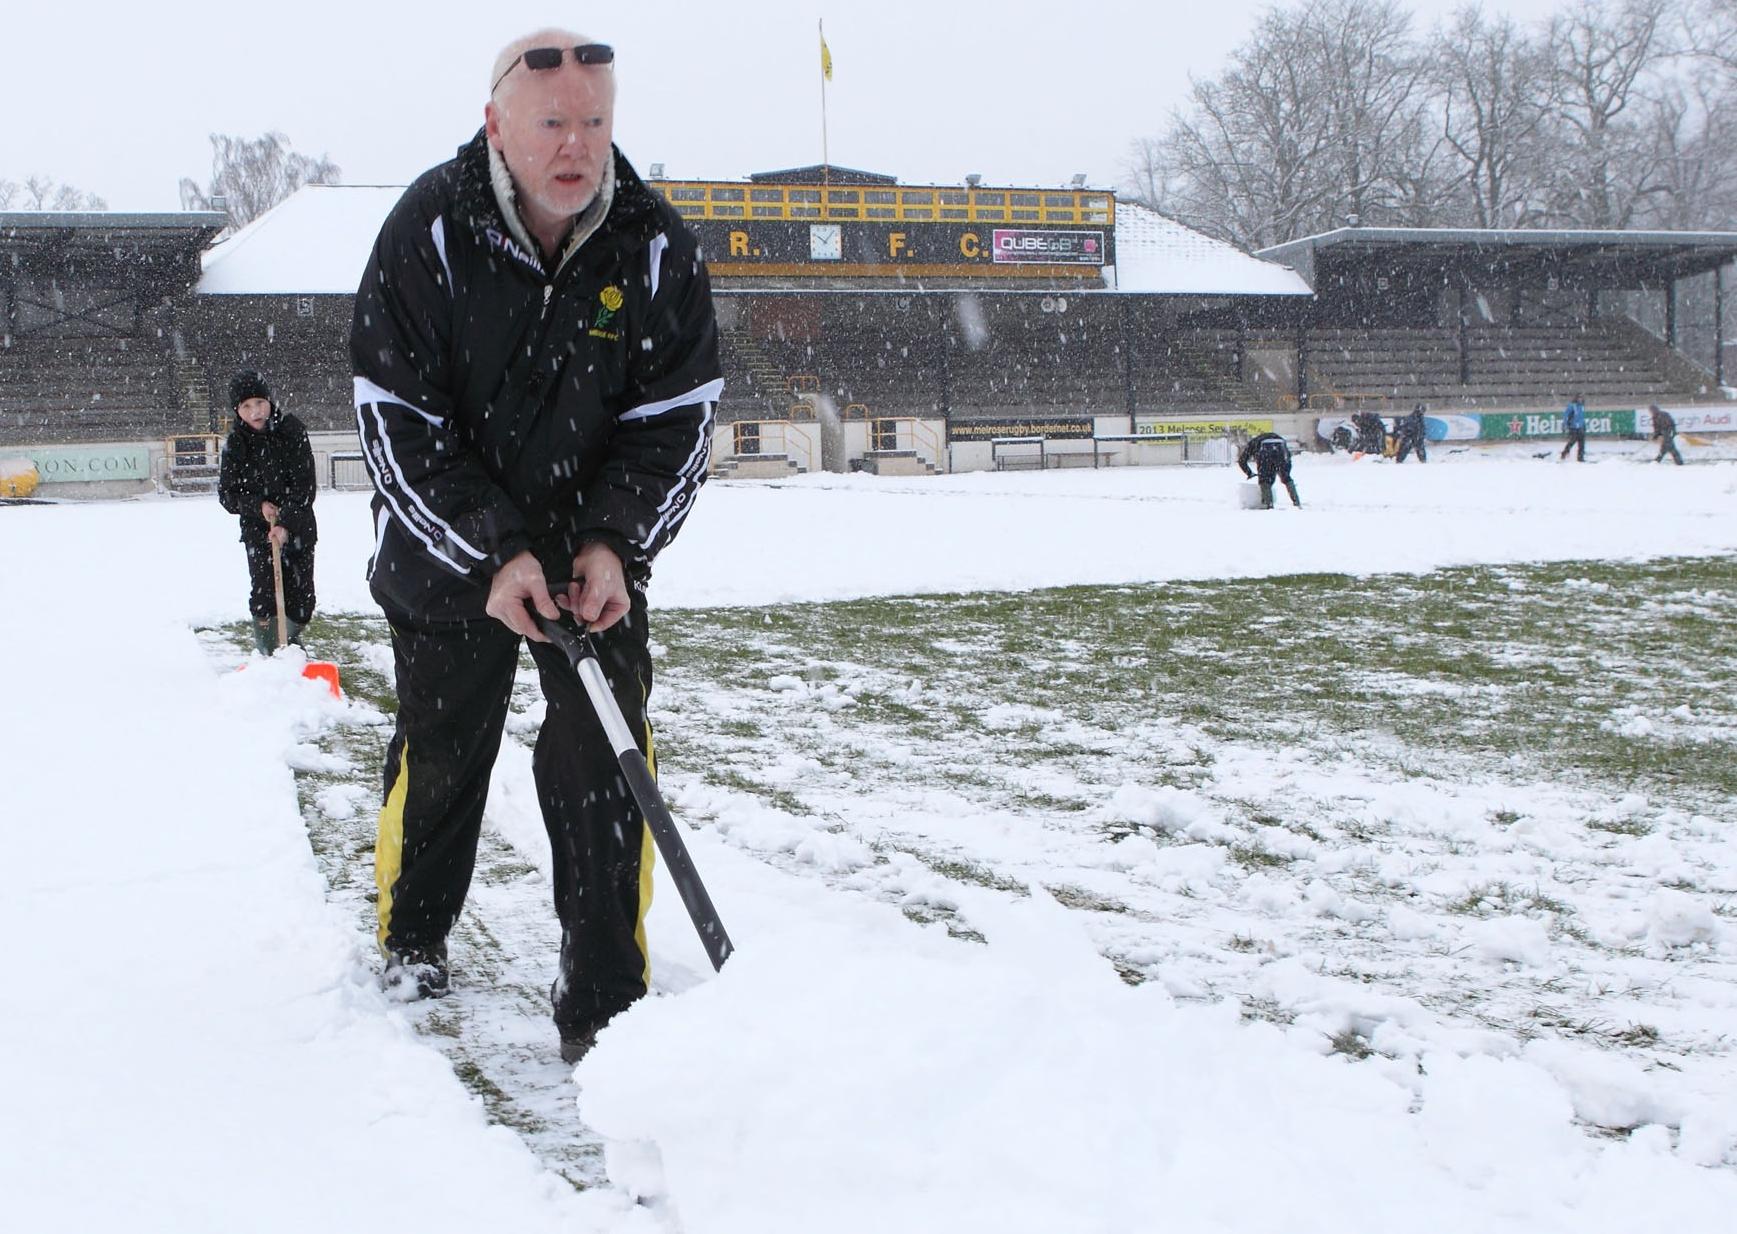 Clearing snow off the pitch at the Greenyards ahead of a game between Melrose and Doncaster.